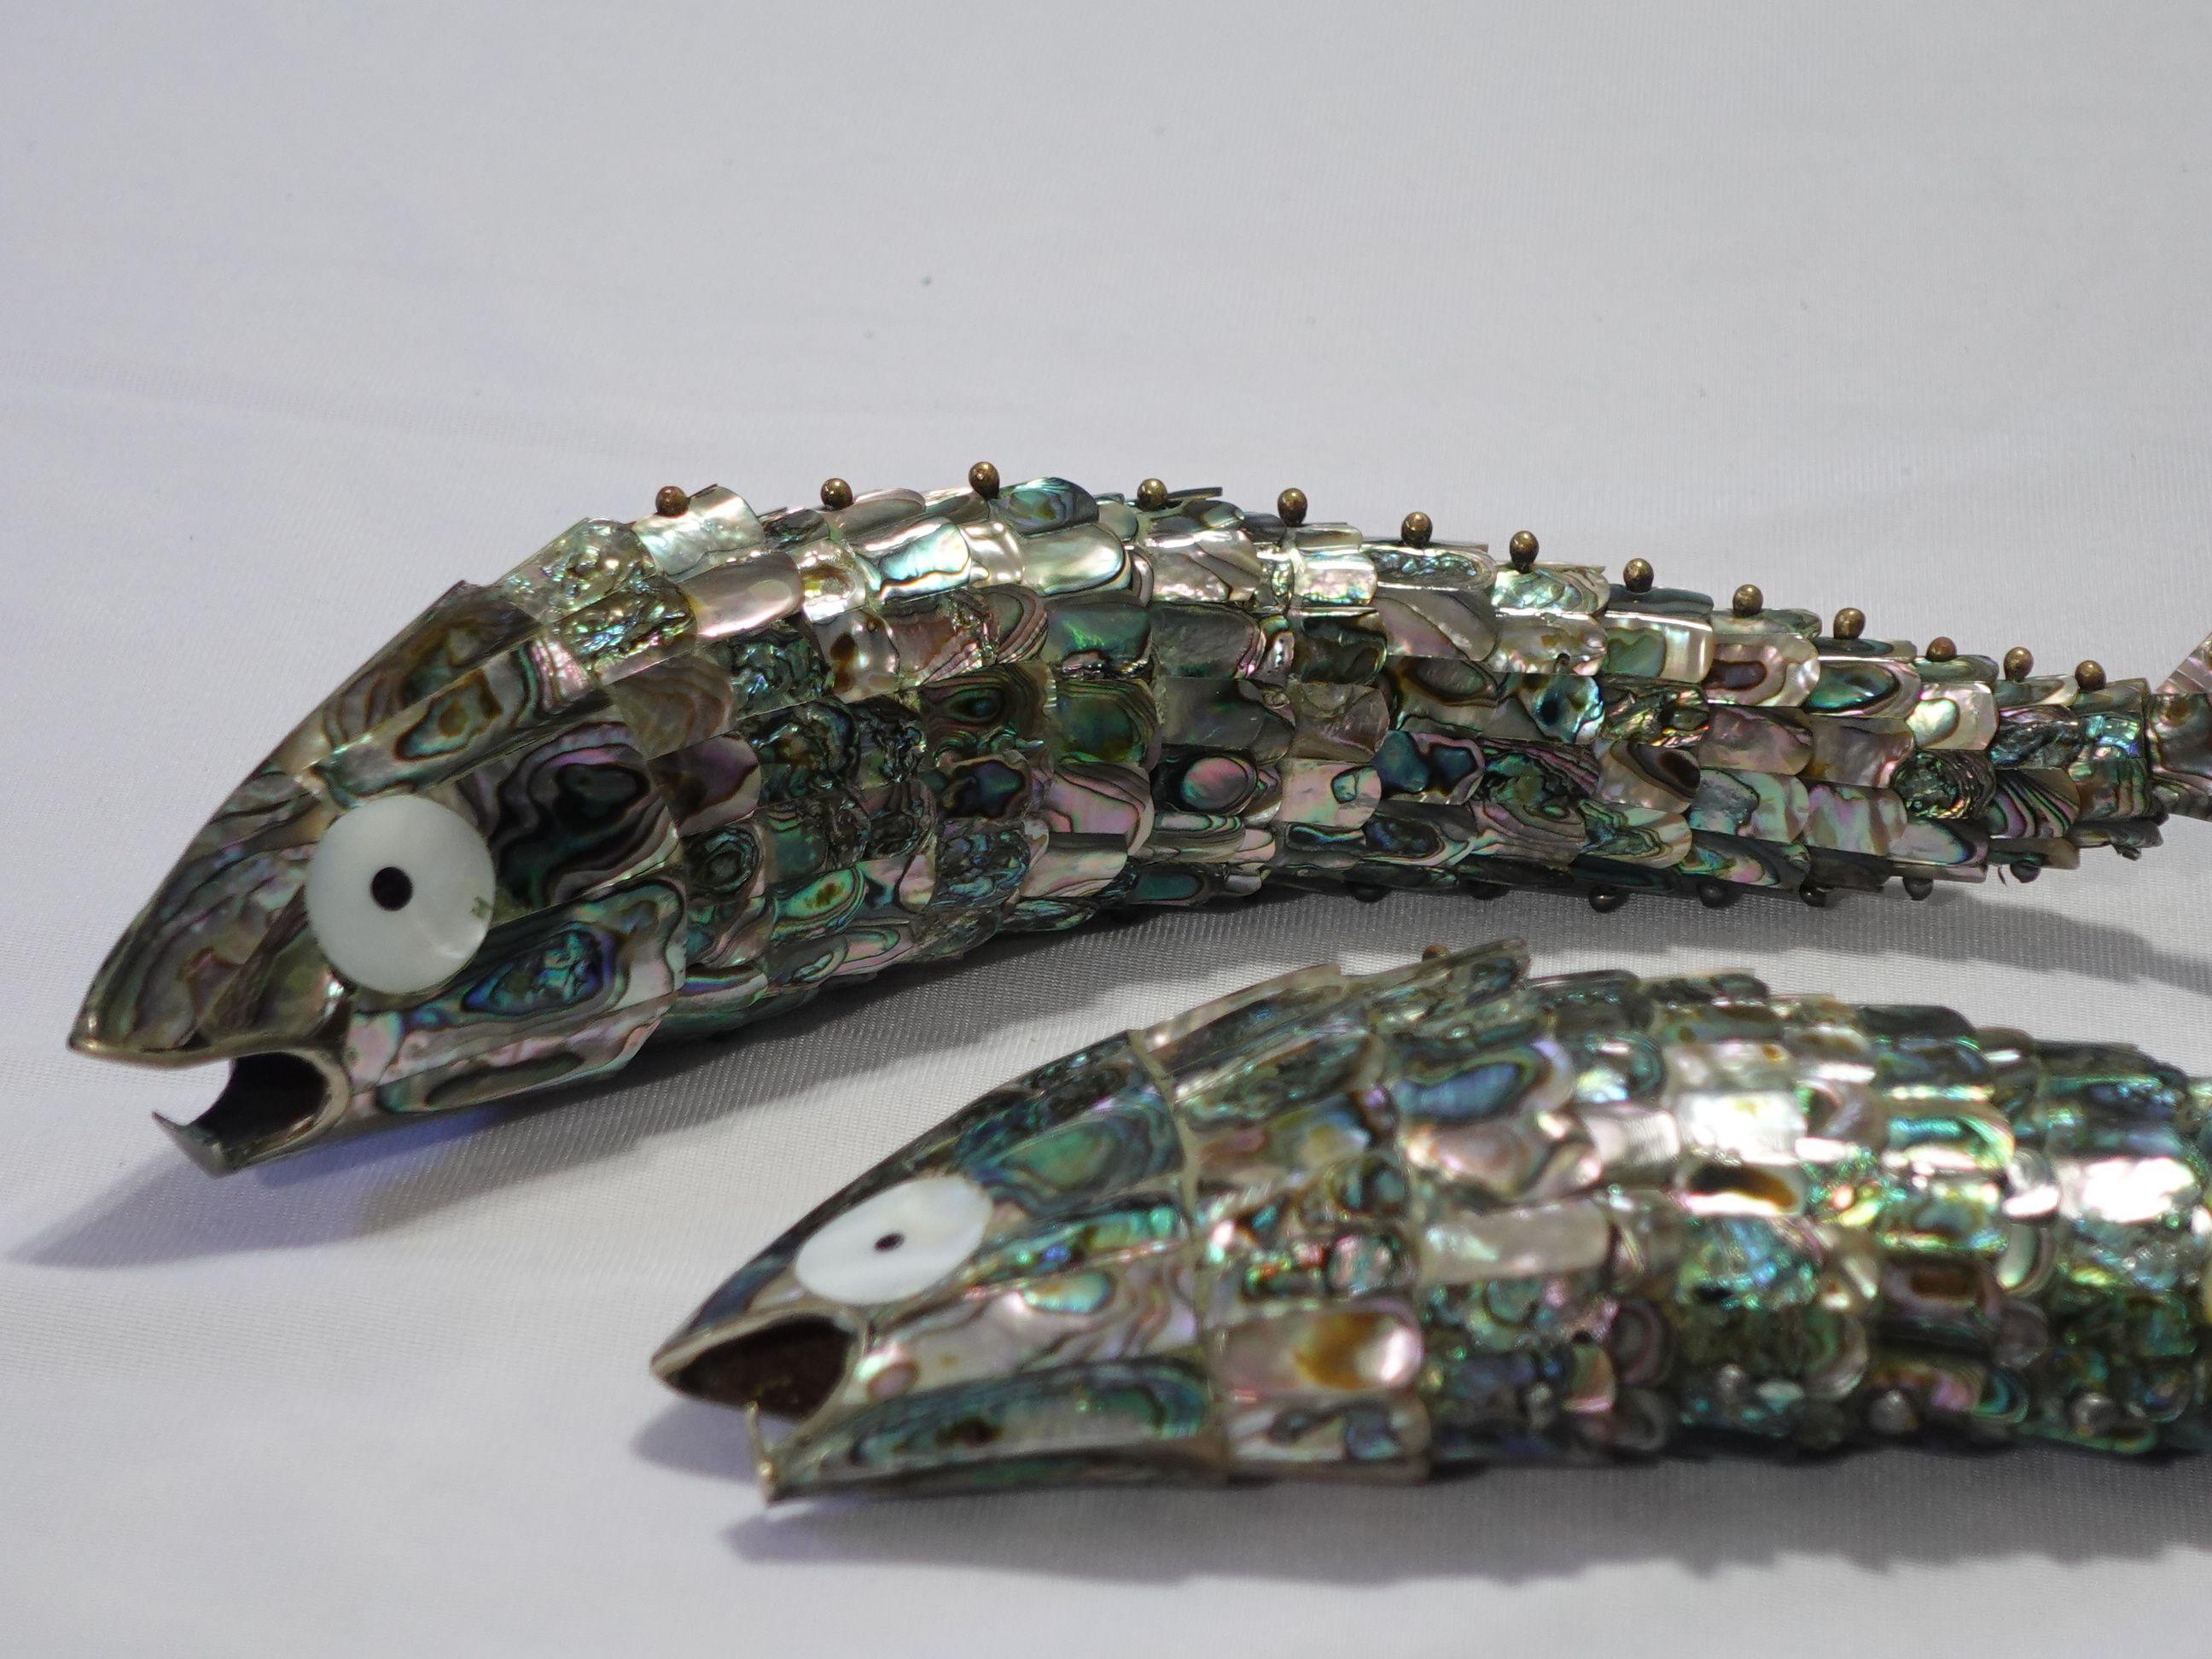 Hand-Crafted Large Articulated Abalone Shell Fish Sculpture/ Bottle Opener by Los Castillo